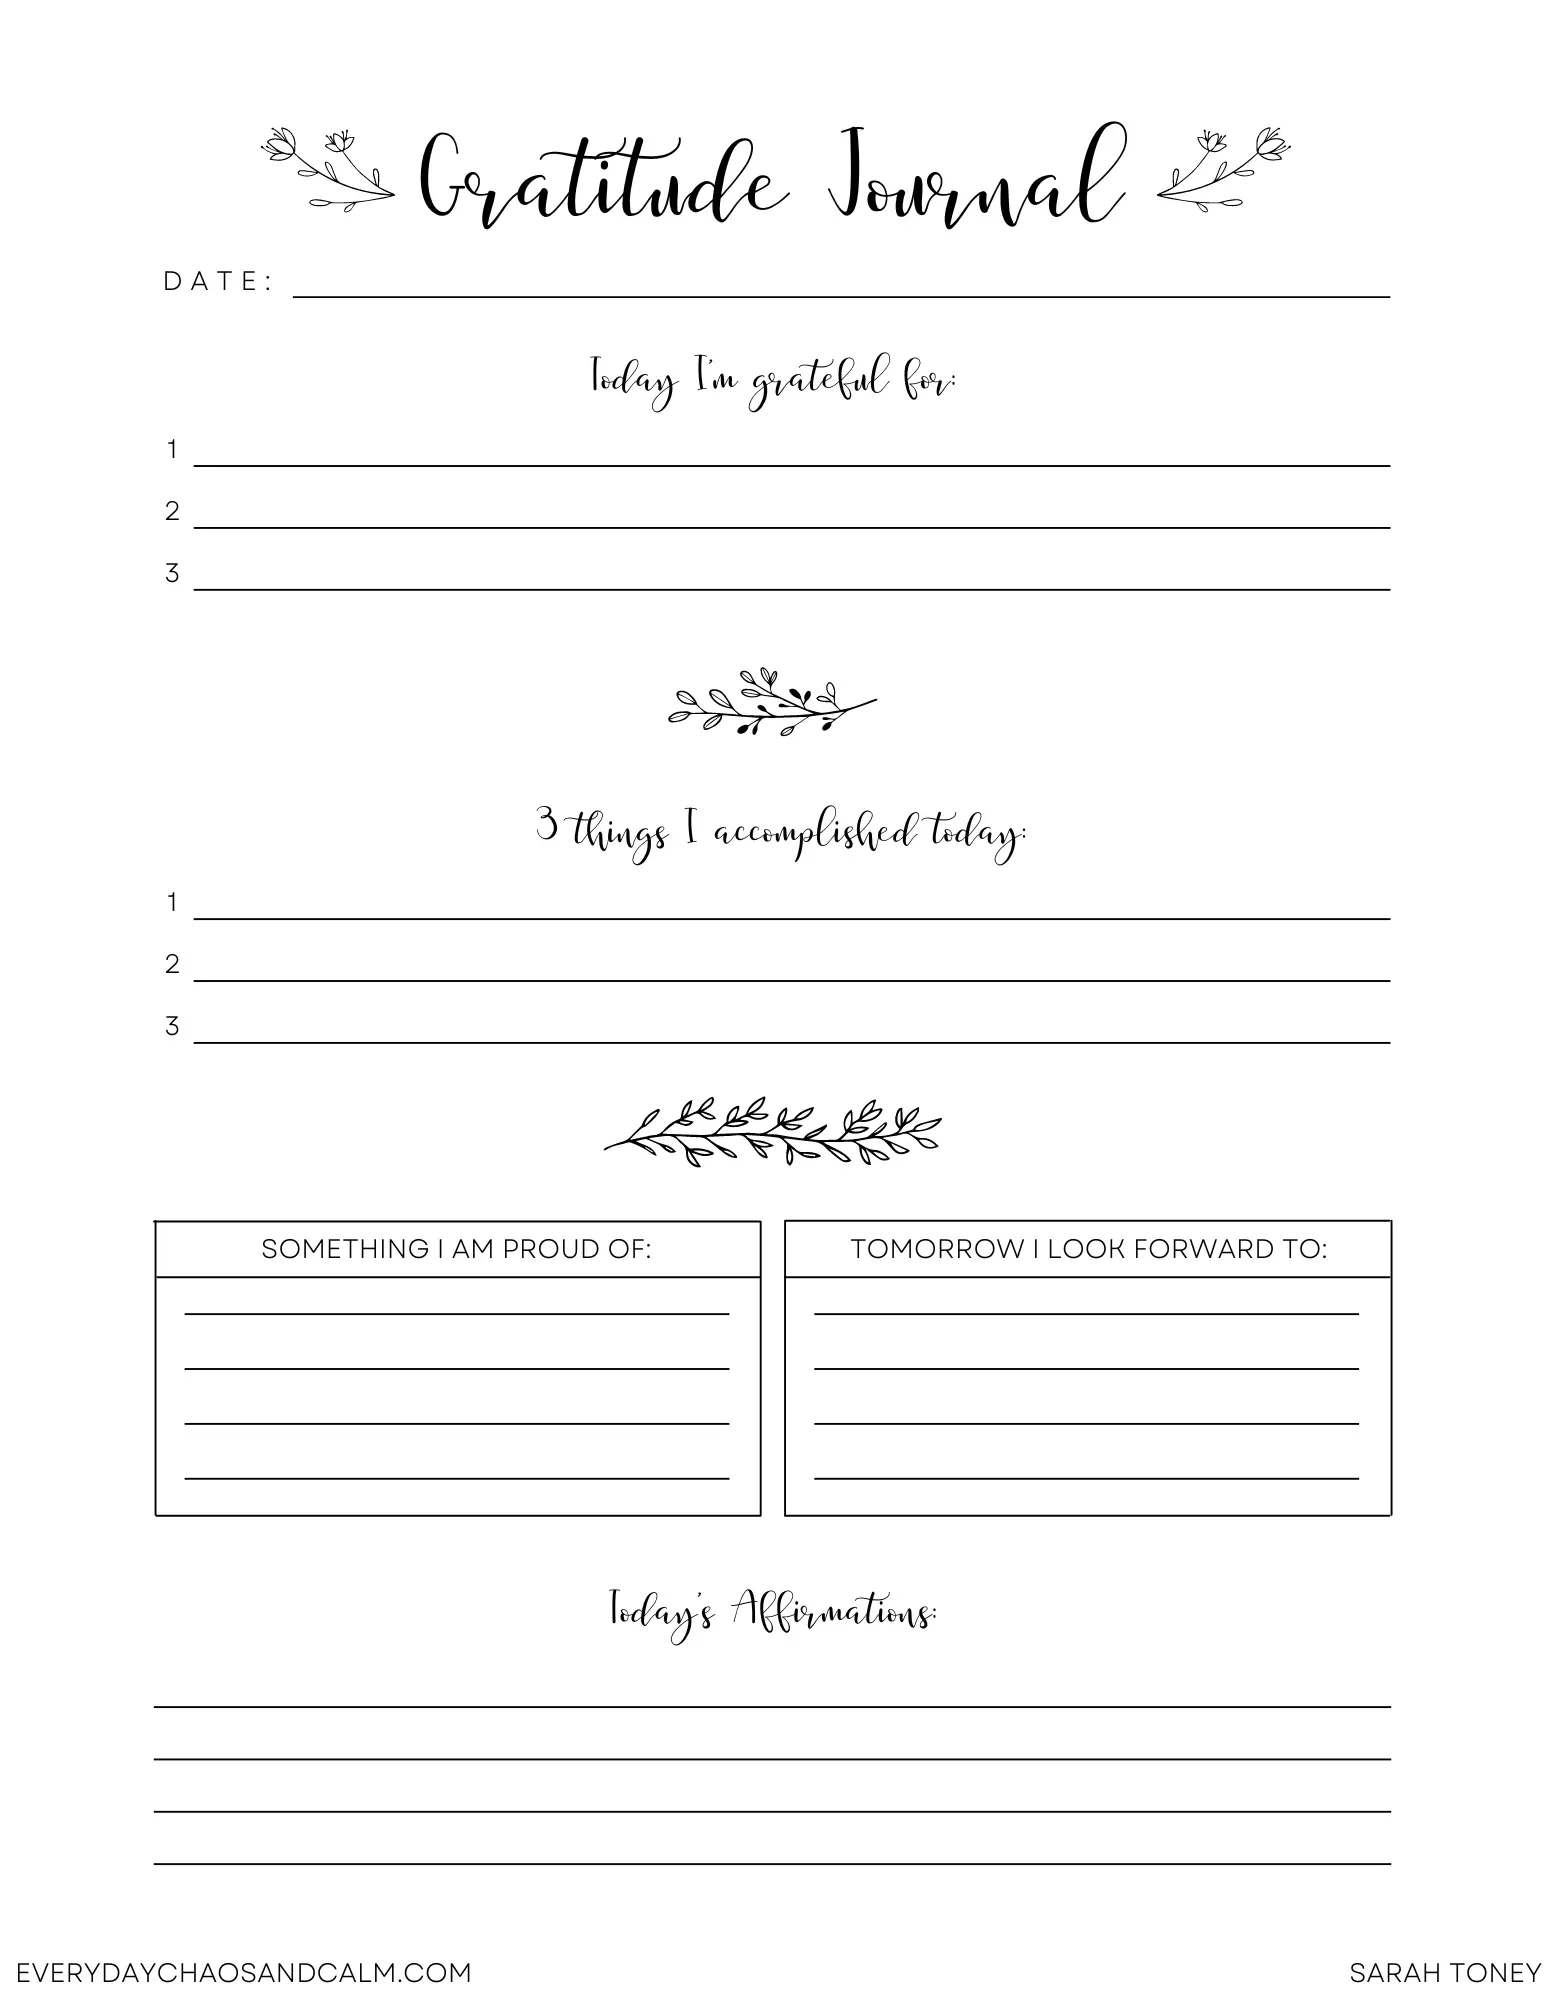 Gratitude Journal for Women Printable Pages Instant Download Self